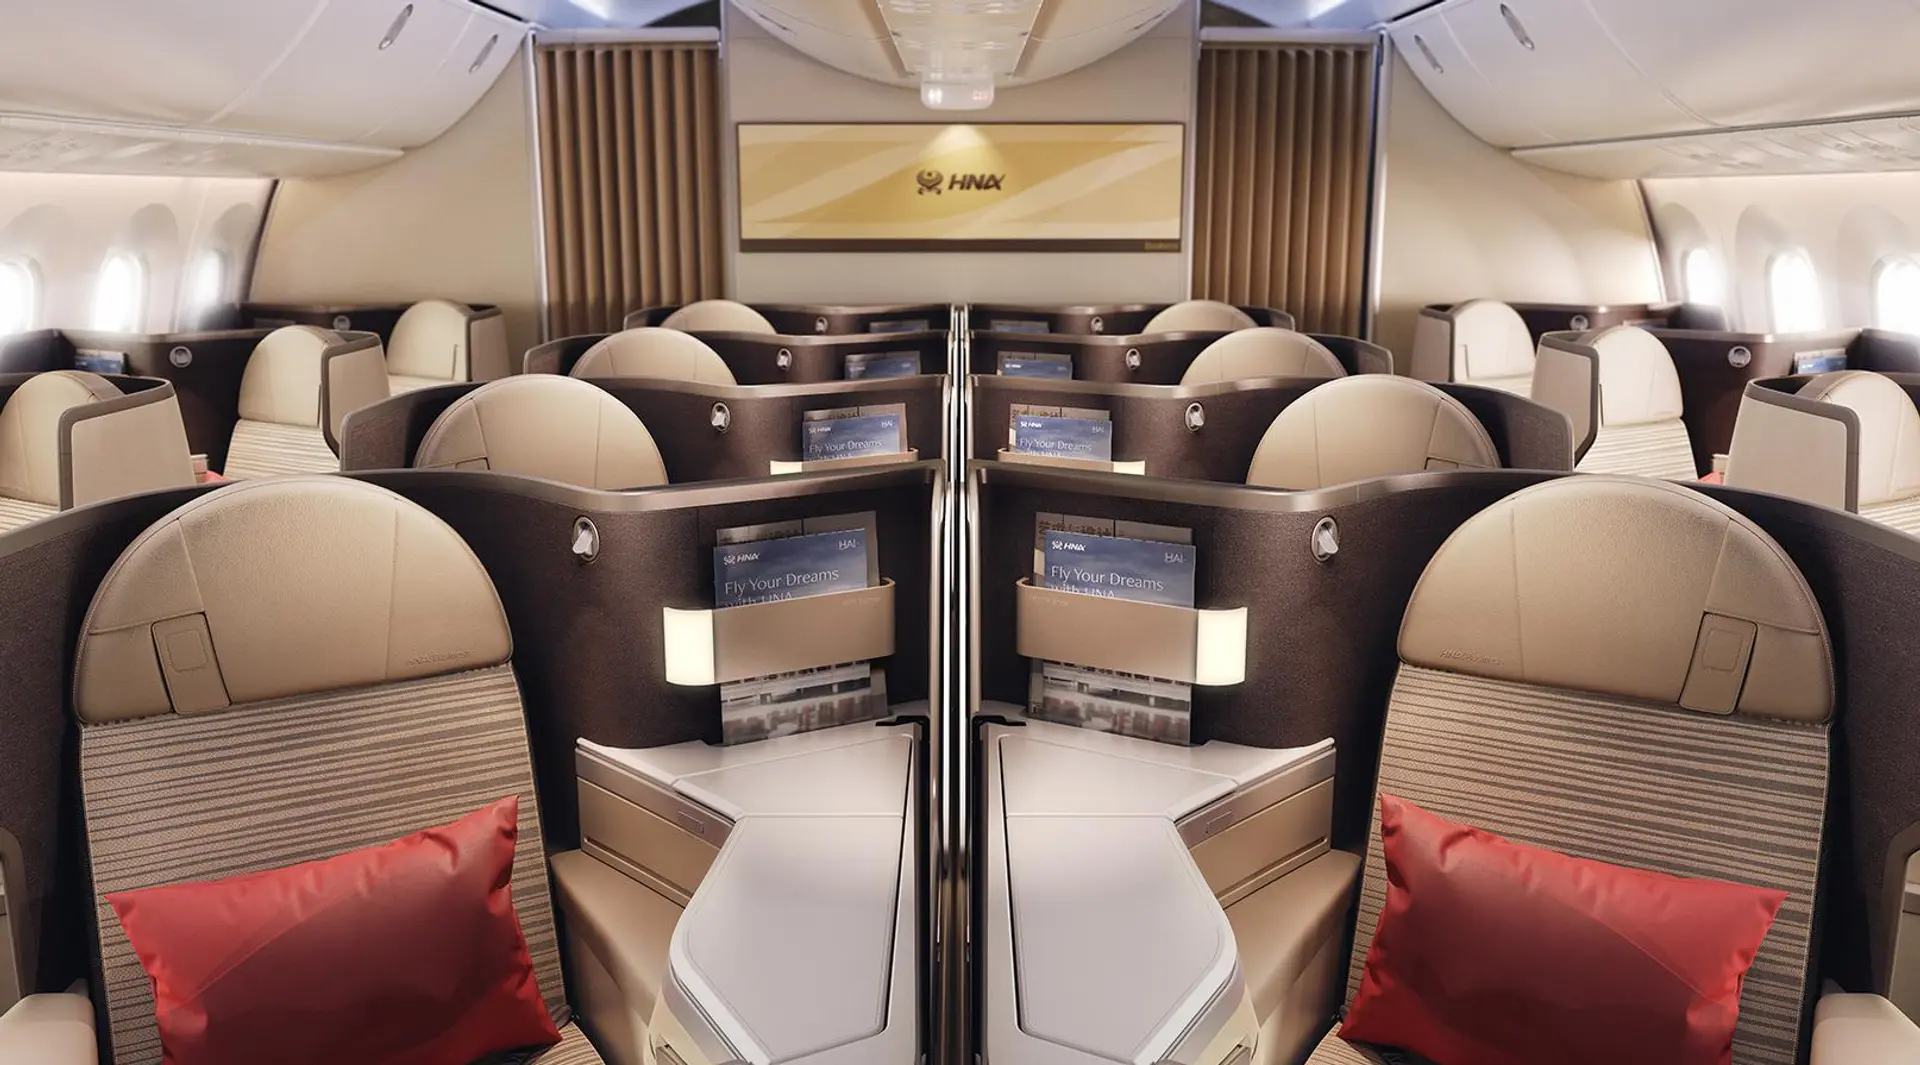 Airline review Cabin & Seat - Hainan Airlines - 2